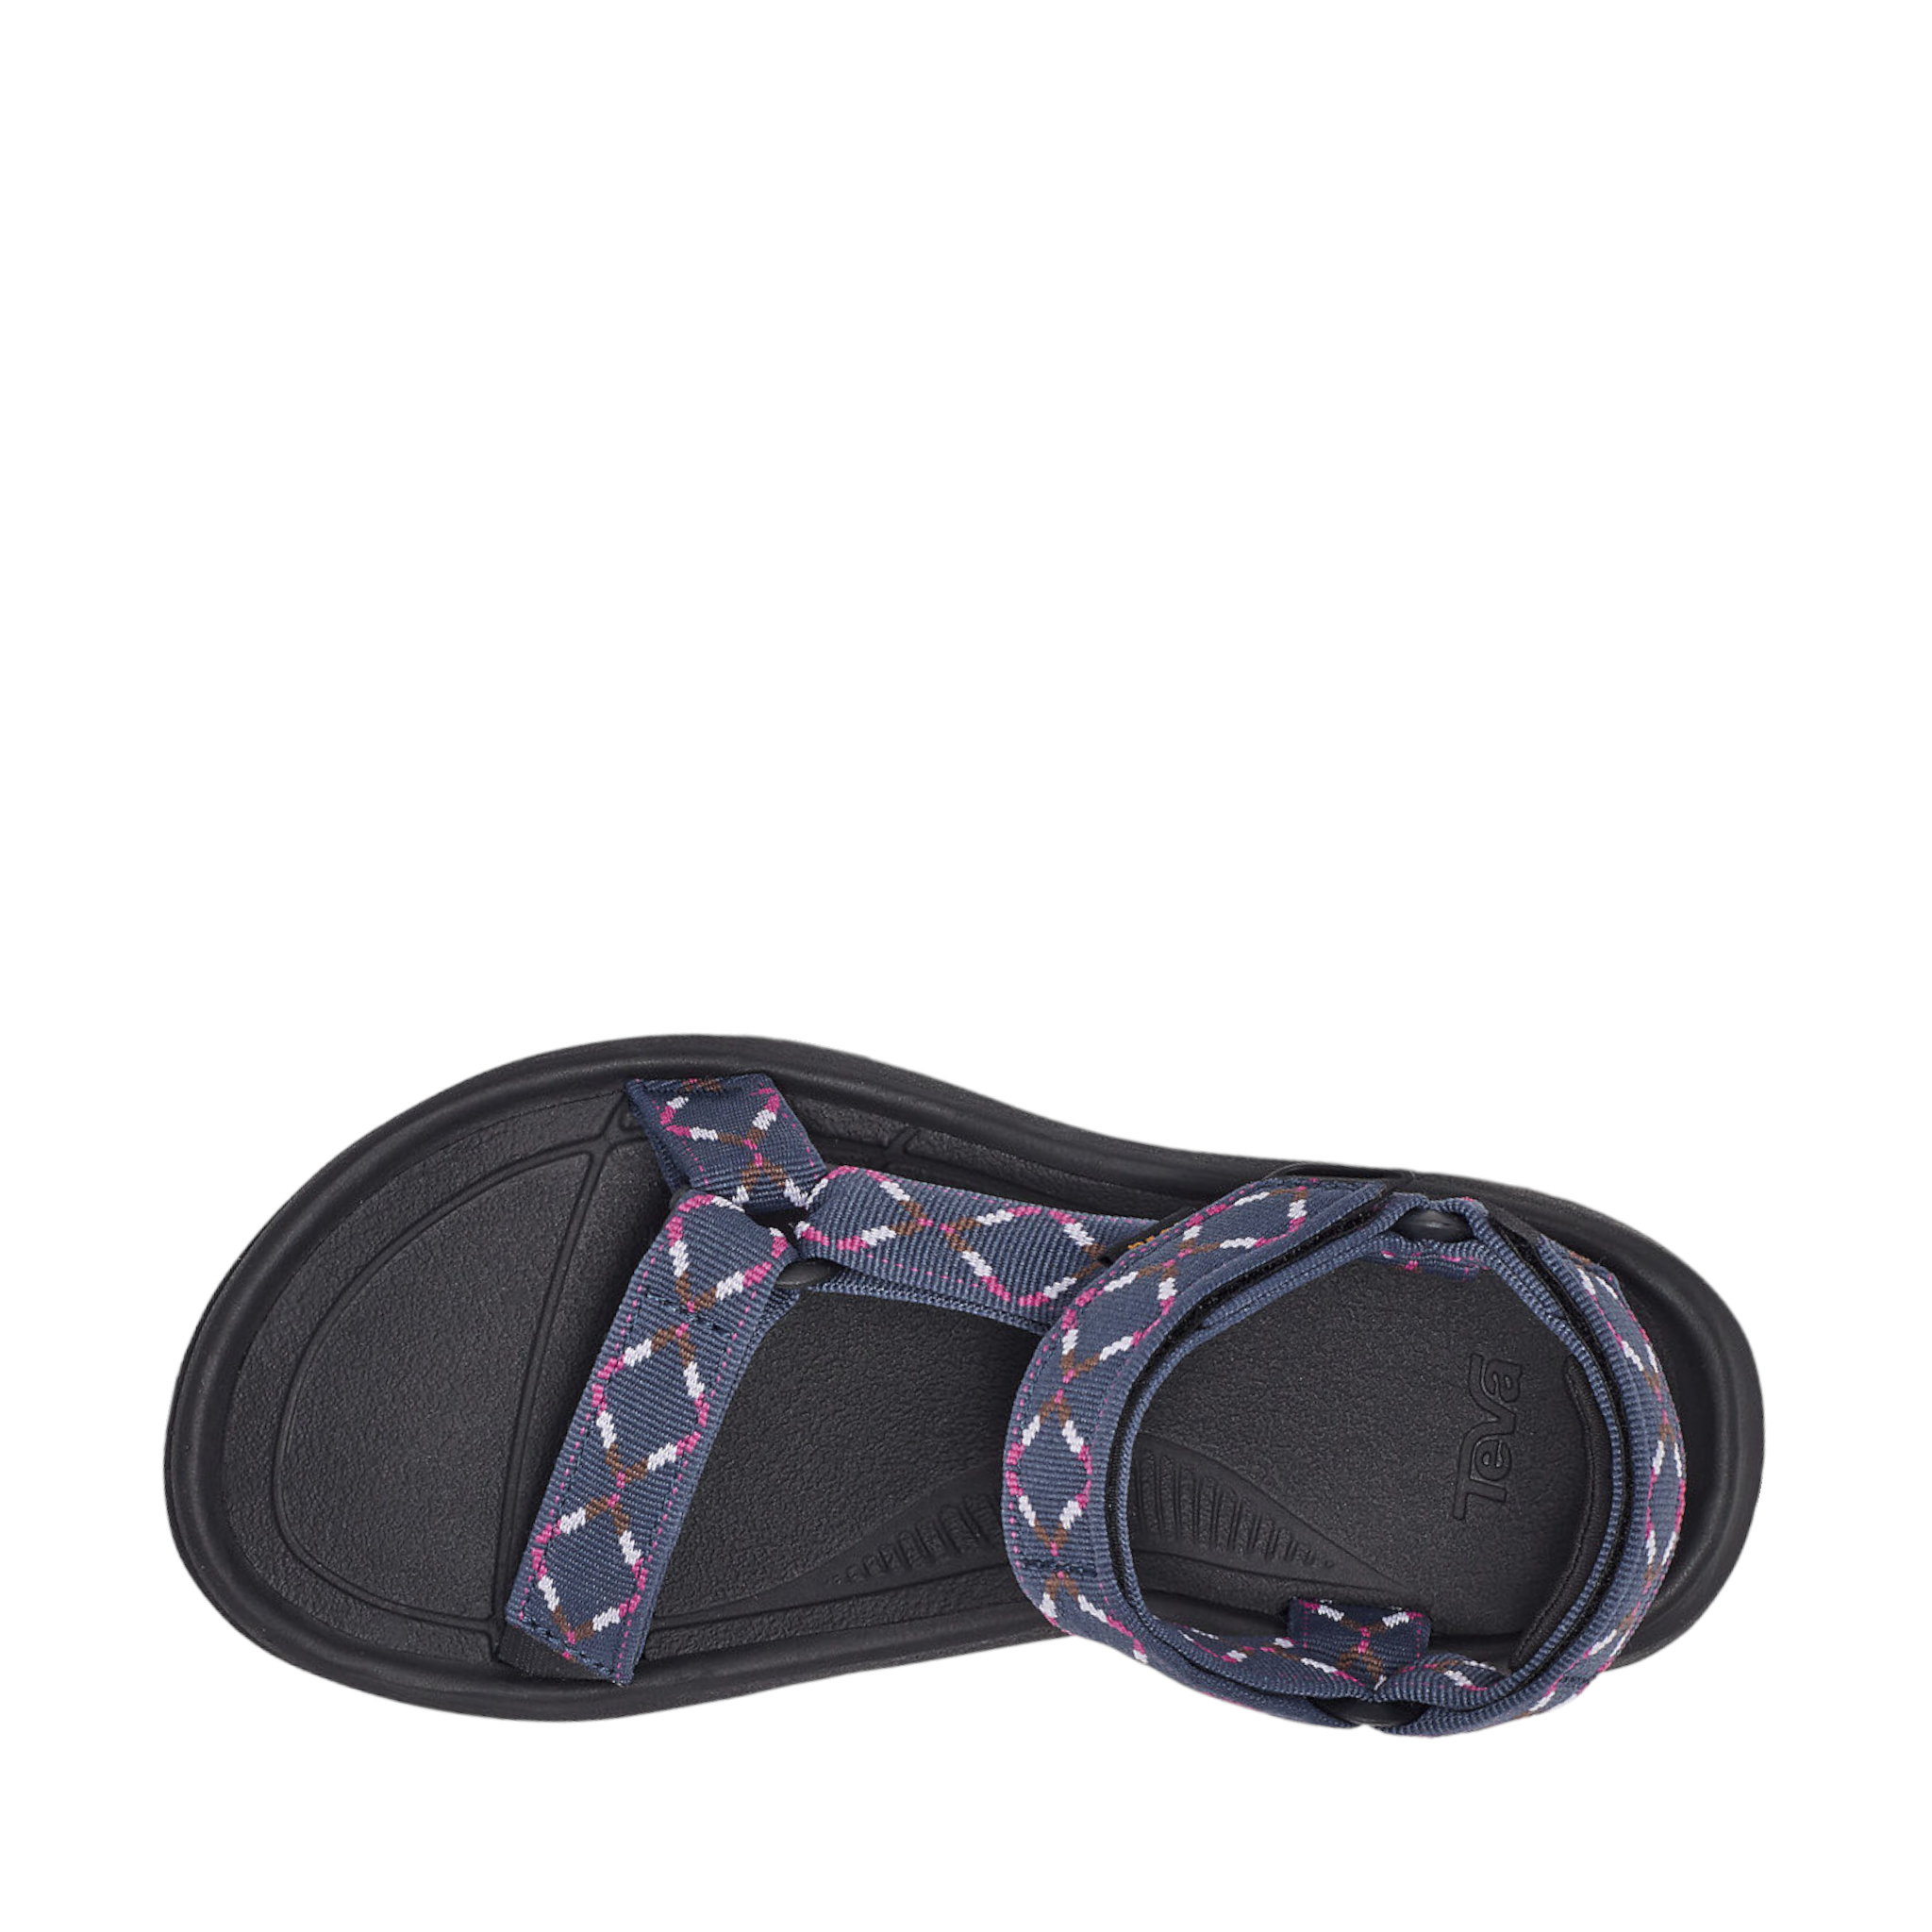 Shop W Hurricane XLT2 - with shoe&amp;me - from Teva - Sandals - Sandals, Summer, Womens - [collection]